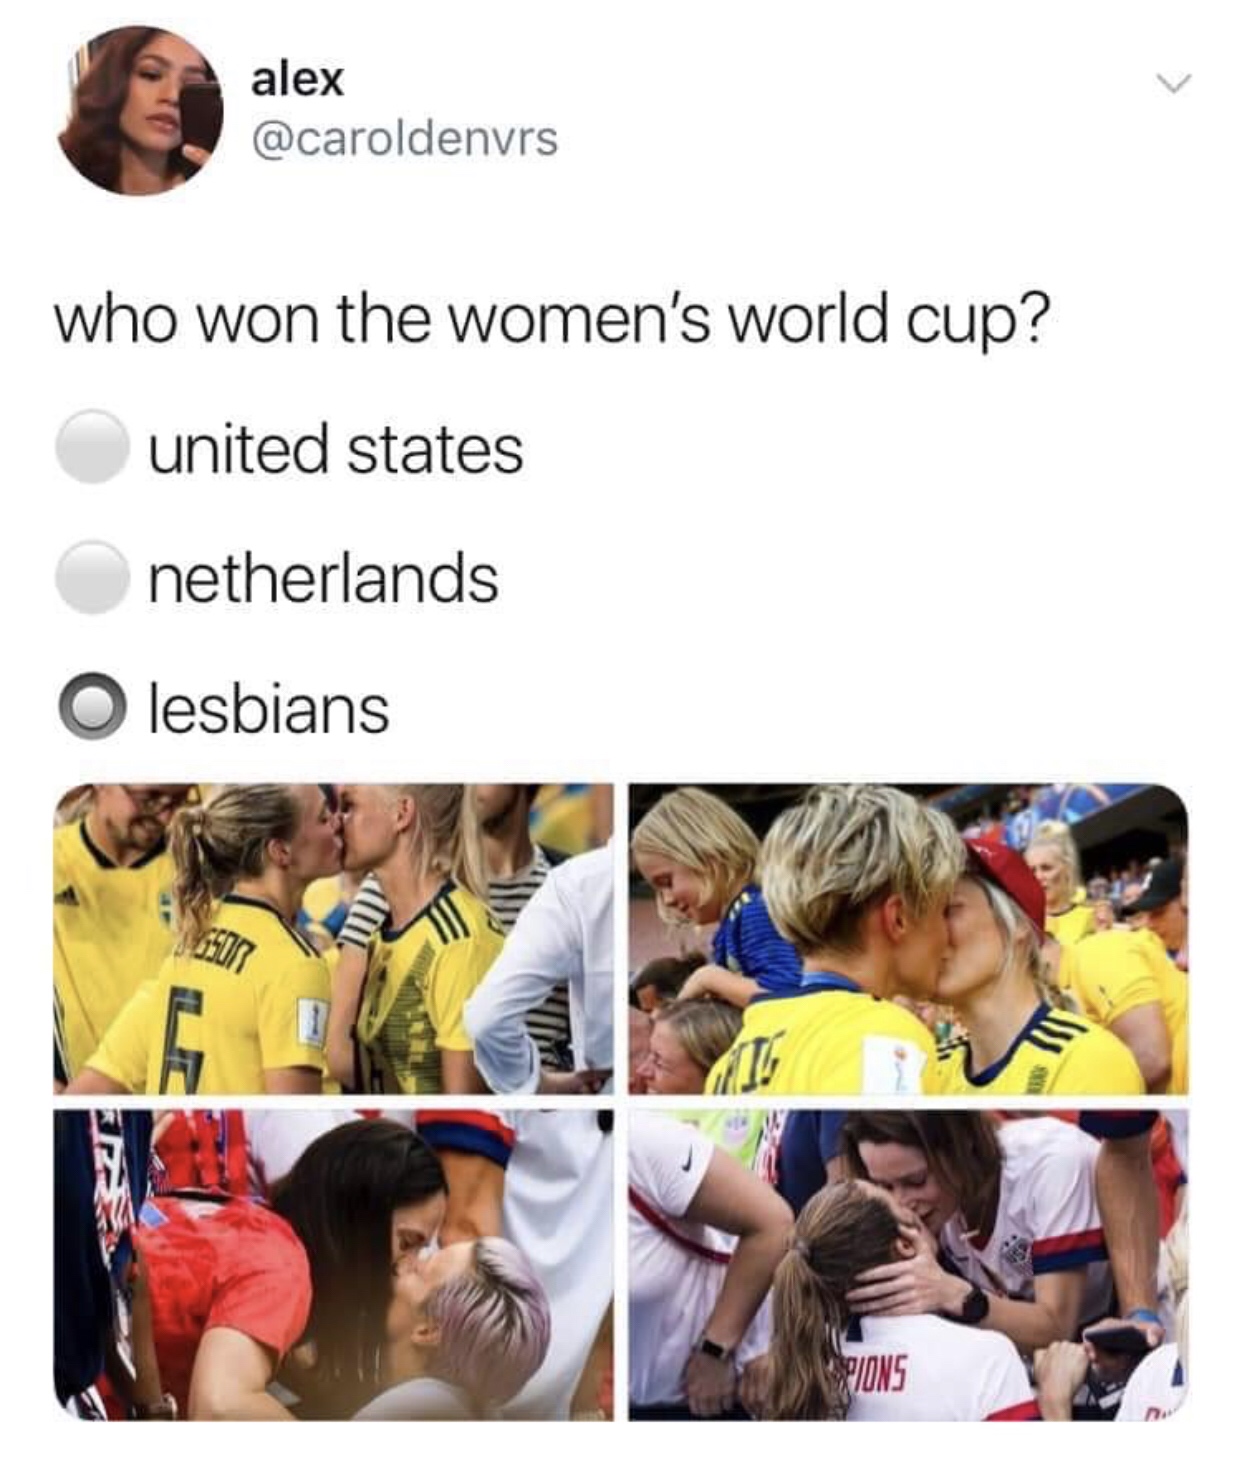 won the world cup lesbians - alex who won the women's world cup? united states netherlands O lesbians Lions